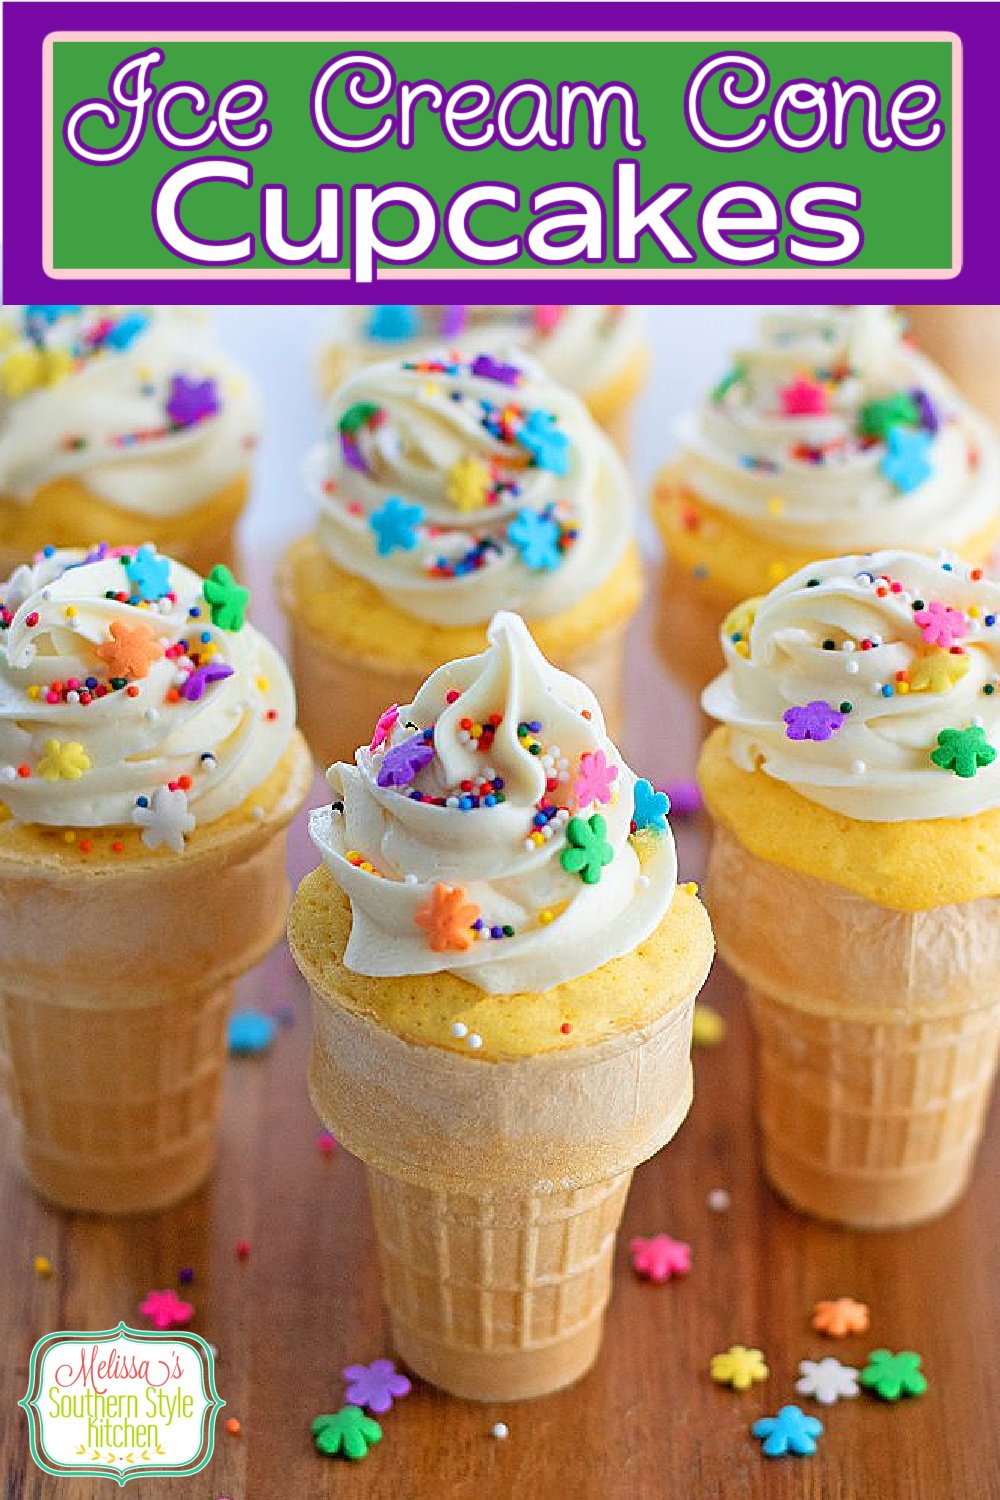 These cute Ice Cream Cone Cupcakes can be made in any flavor you like and decorated to match the occasion #cupcakes #icecreamcone #icecreamconecupcakes #cakerecipes #cupcakes #southernstyle #southerndesserts